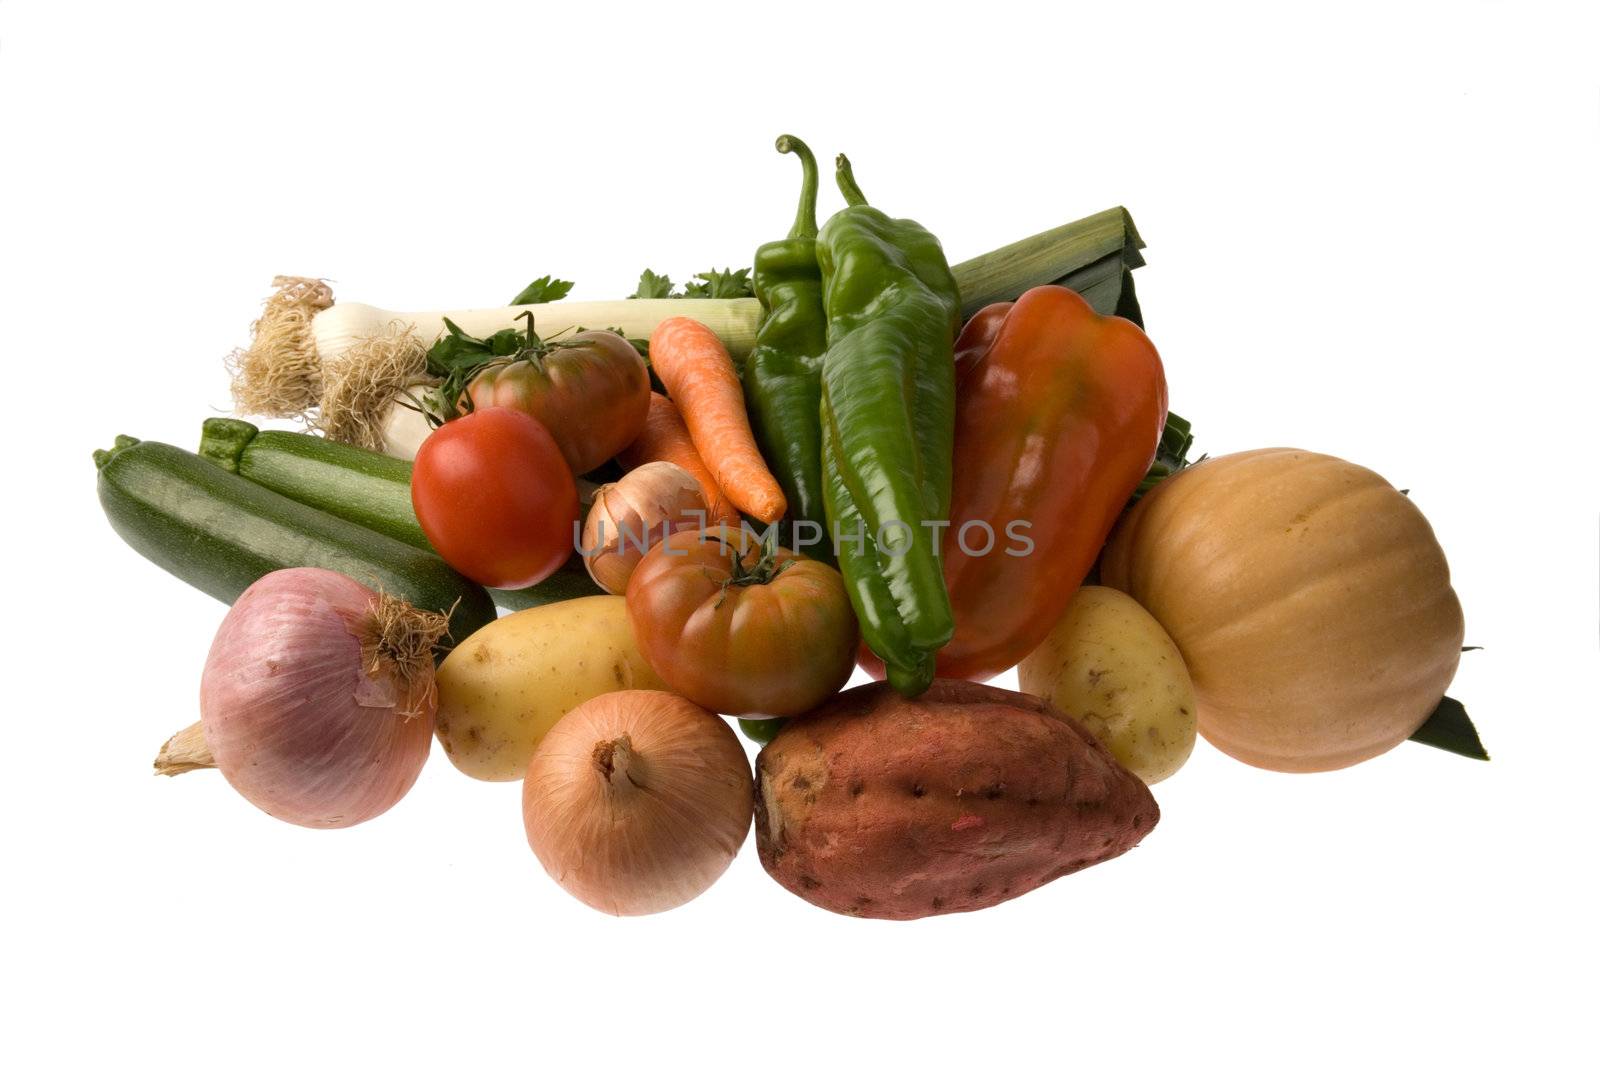 Arrangement of red and green peppers, onion, pumpkin, potatoes and sweet potatoes, pumpkin, carrots, tomatoes, parsley and zucchini isolated over white background.